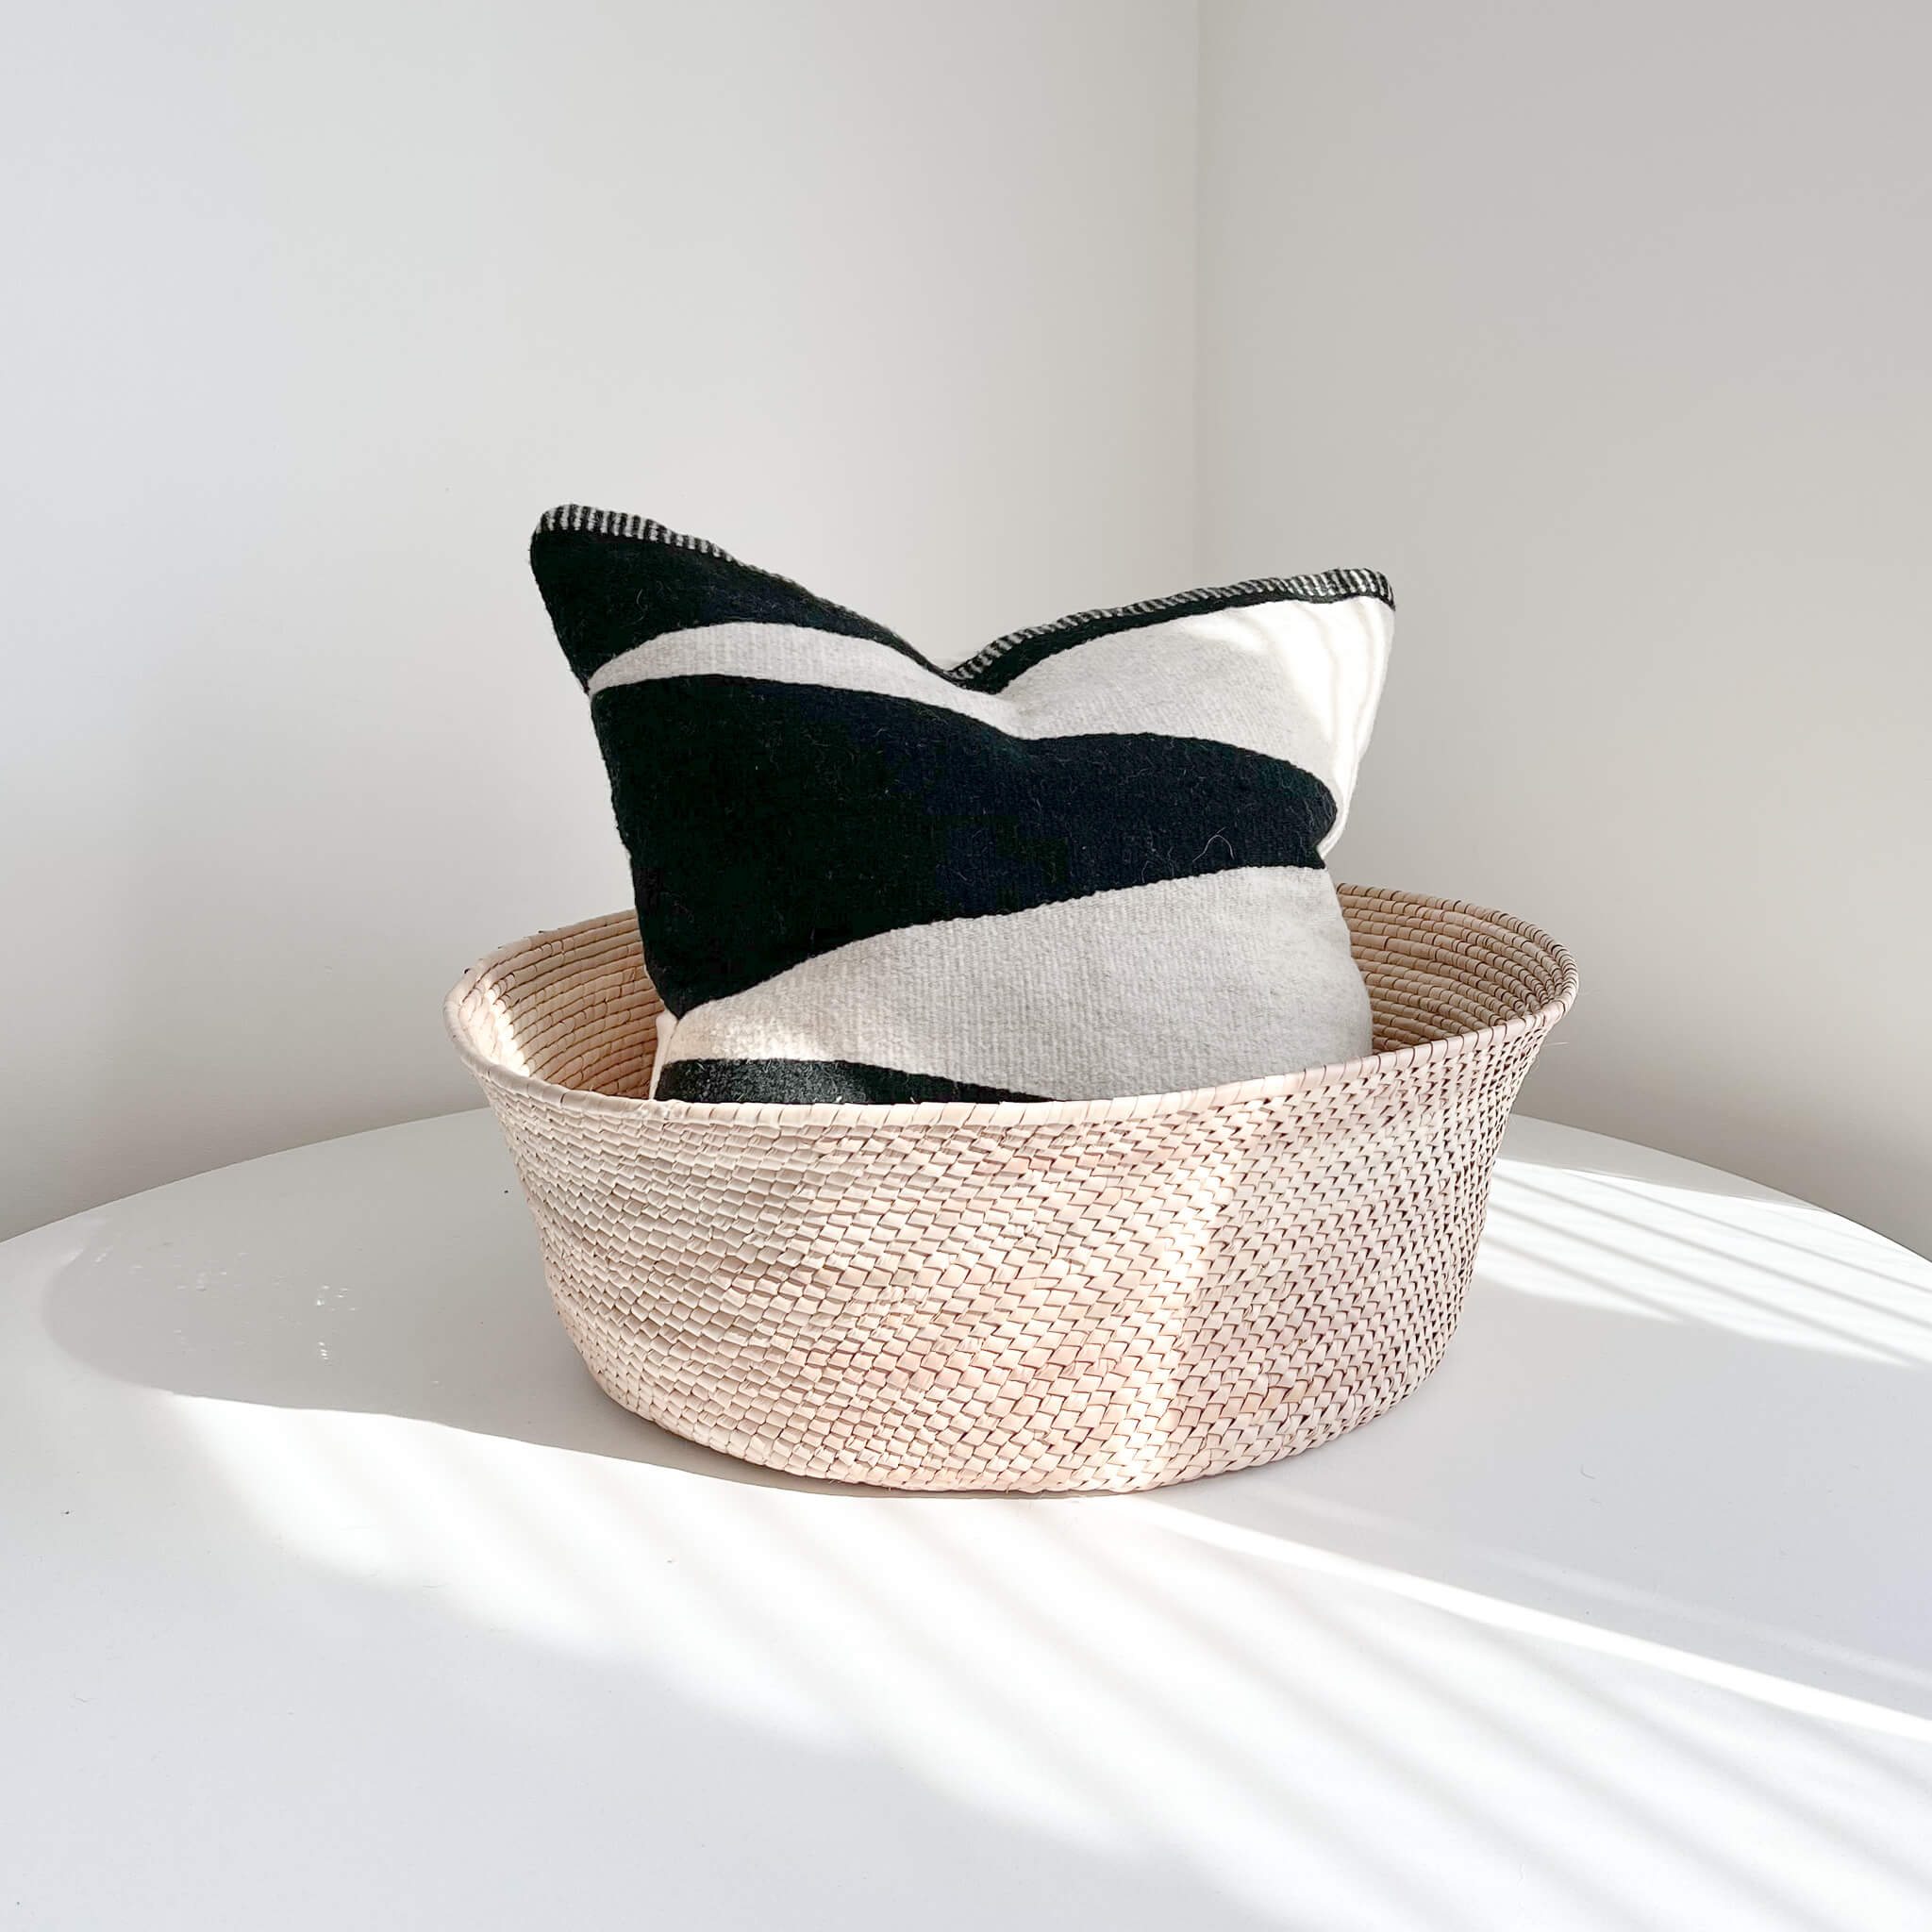 Large palm floor basket on a white table holding a large pillow.